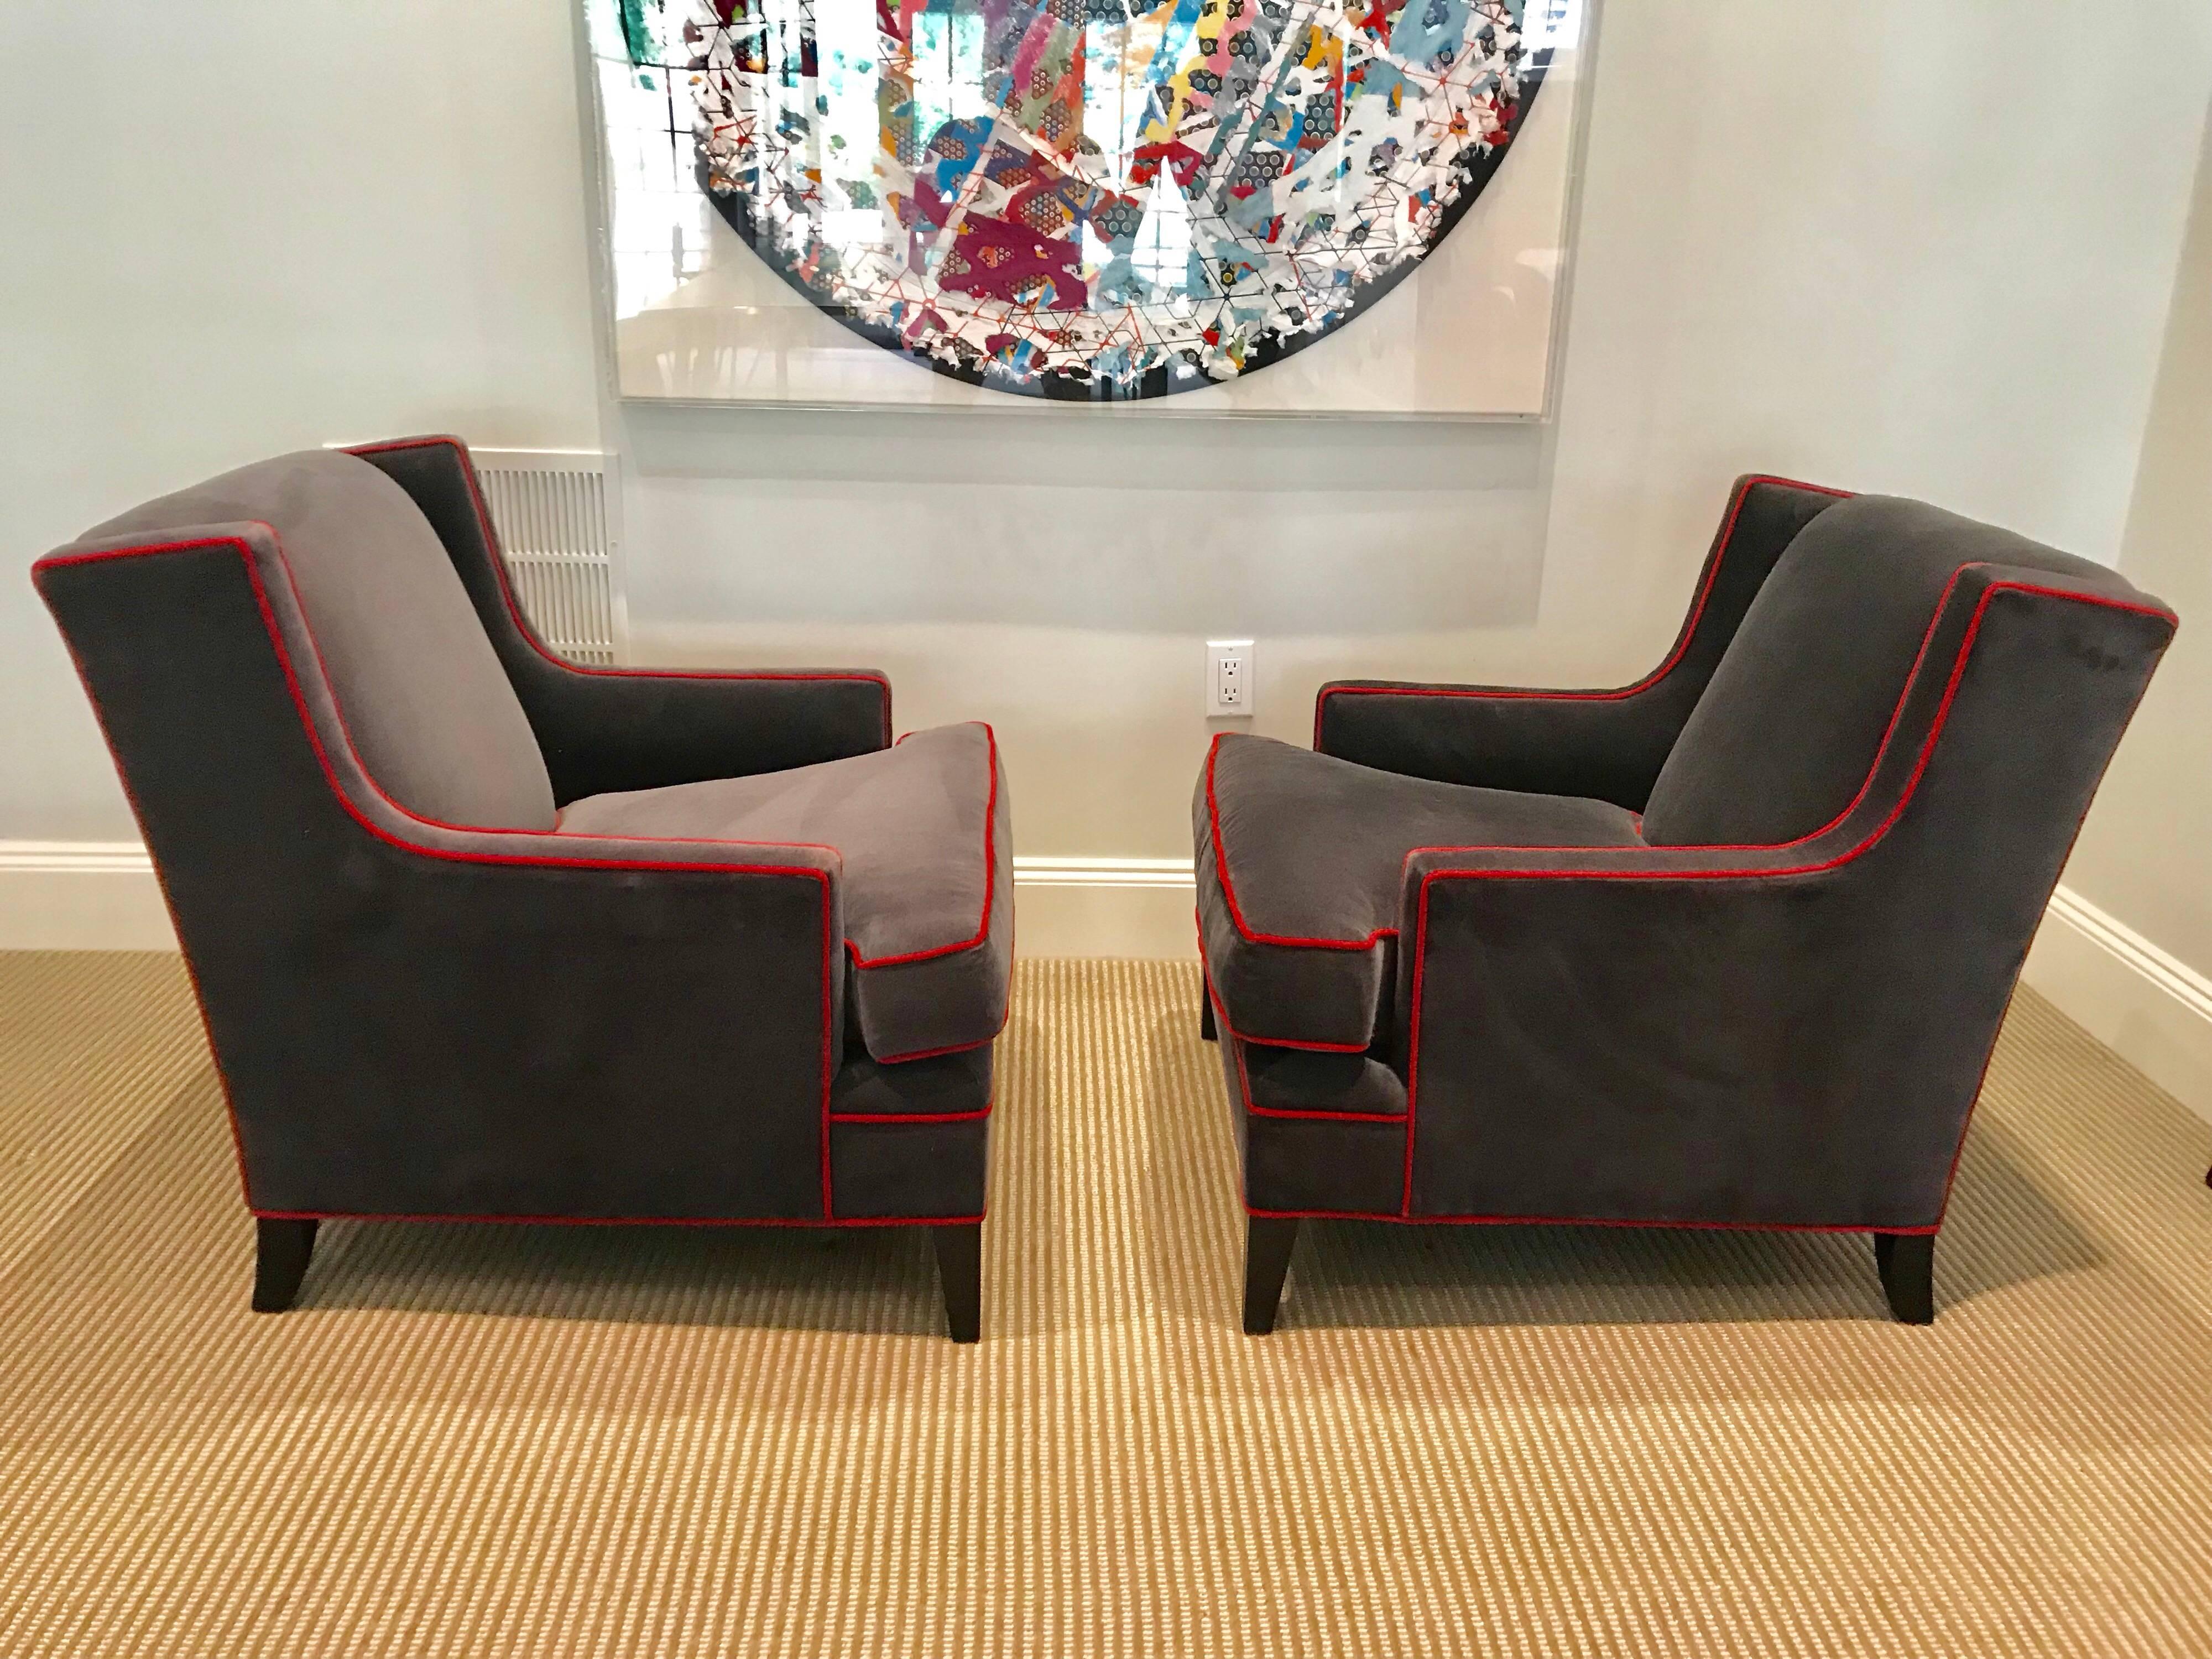 This comfortable pair of Mitchell Gold & Bob Williams Lolling chairs are covered in grey cotton velvet with a contrasting red gimp. They came from a fine local home without pets and were barely used. There is also a 7' long sofa that is listed